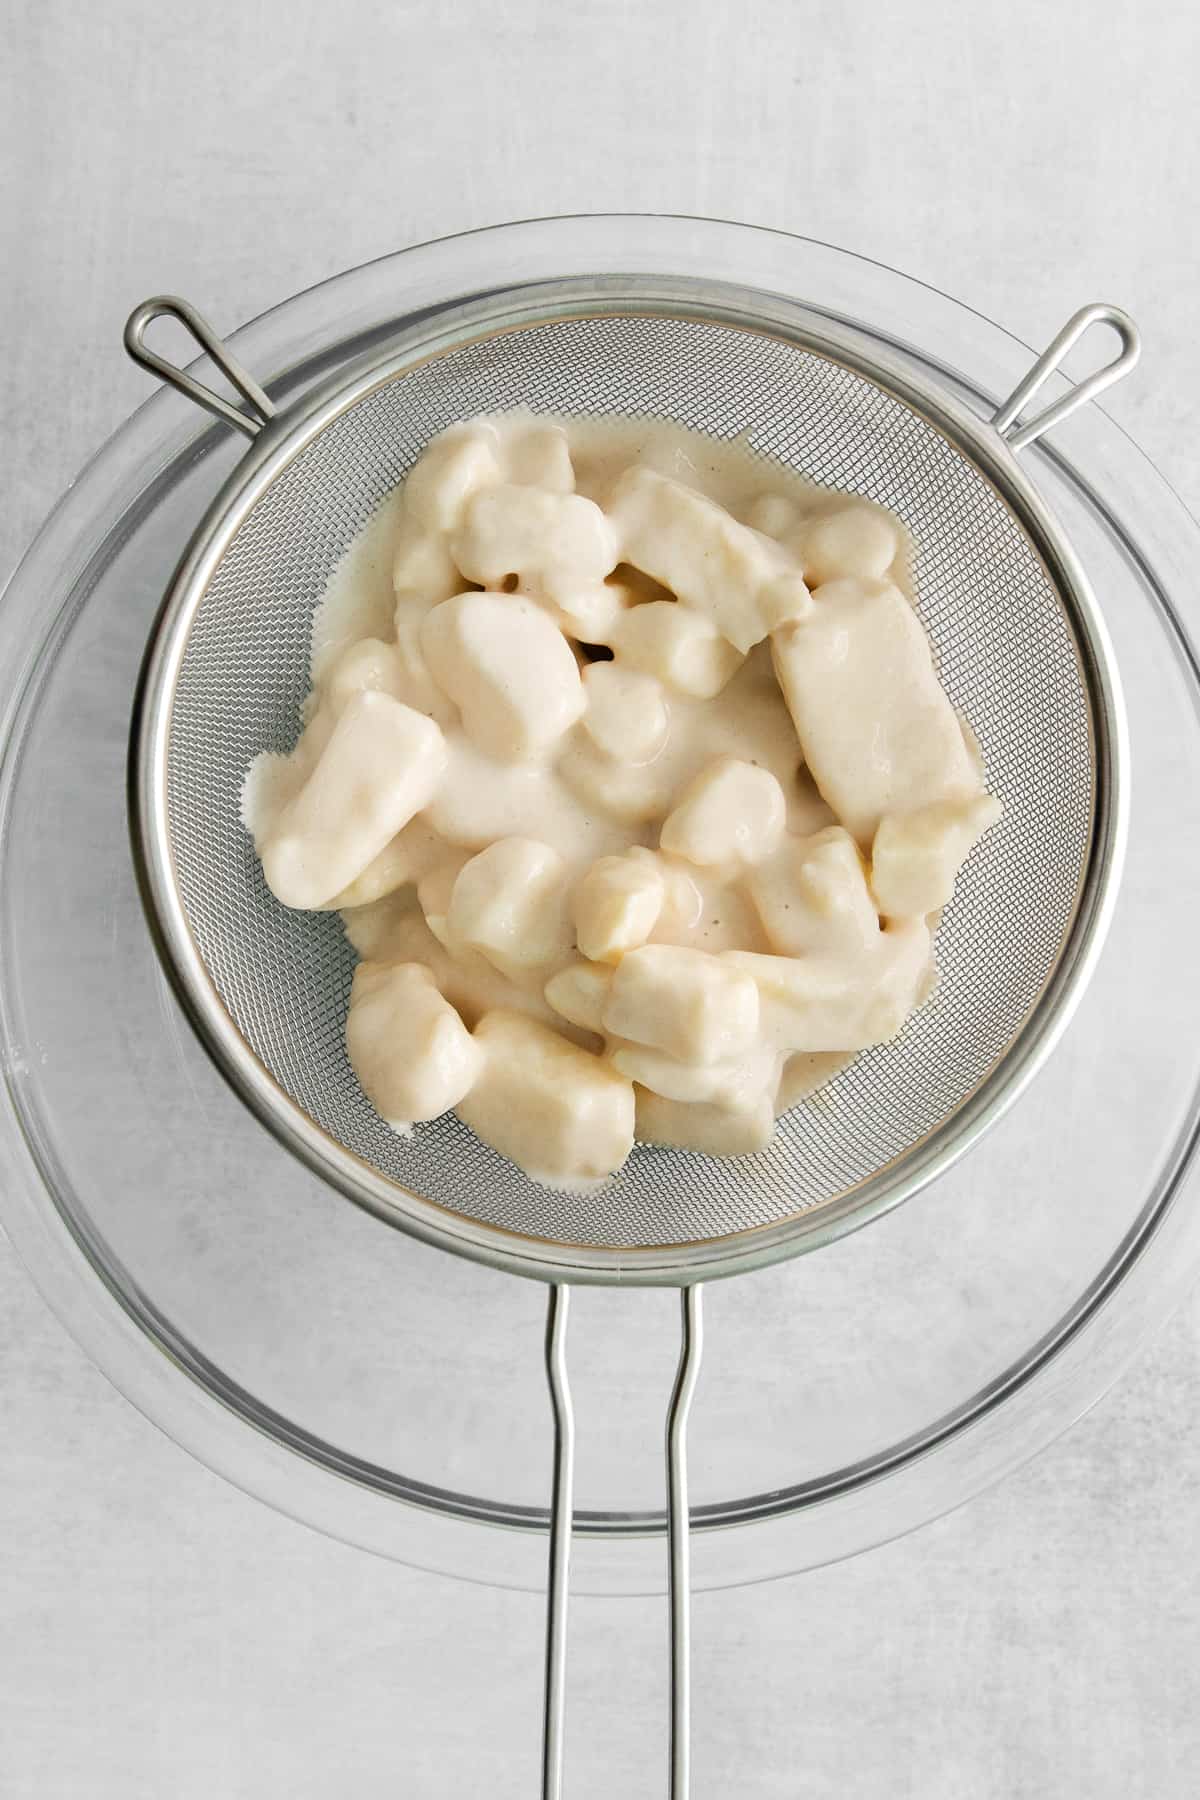 batter covered curds in strainer.